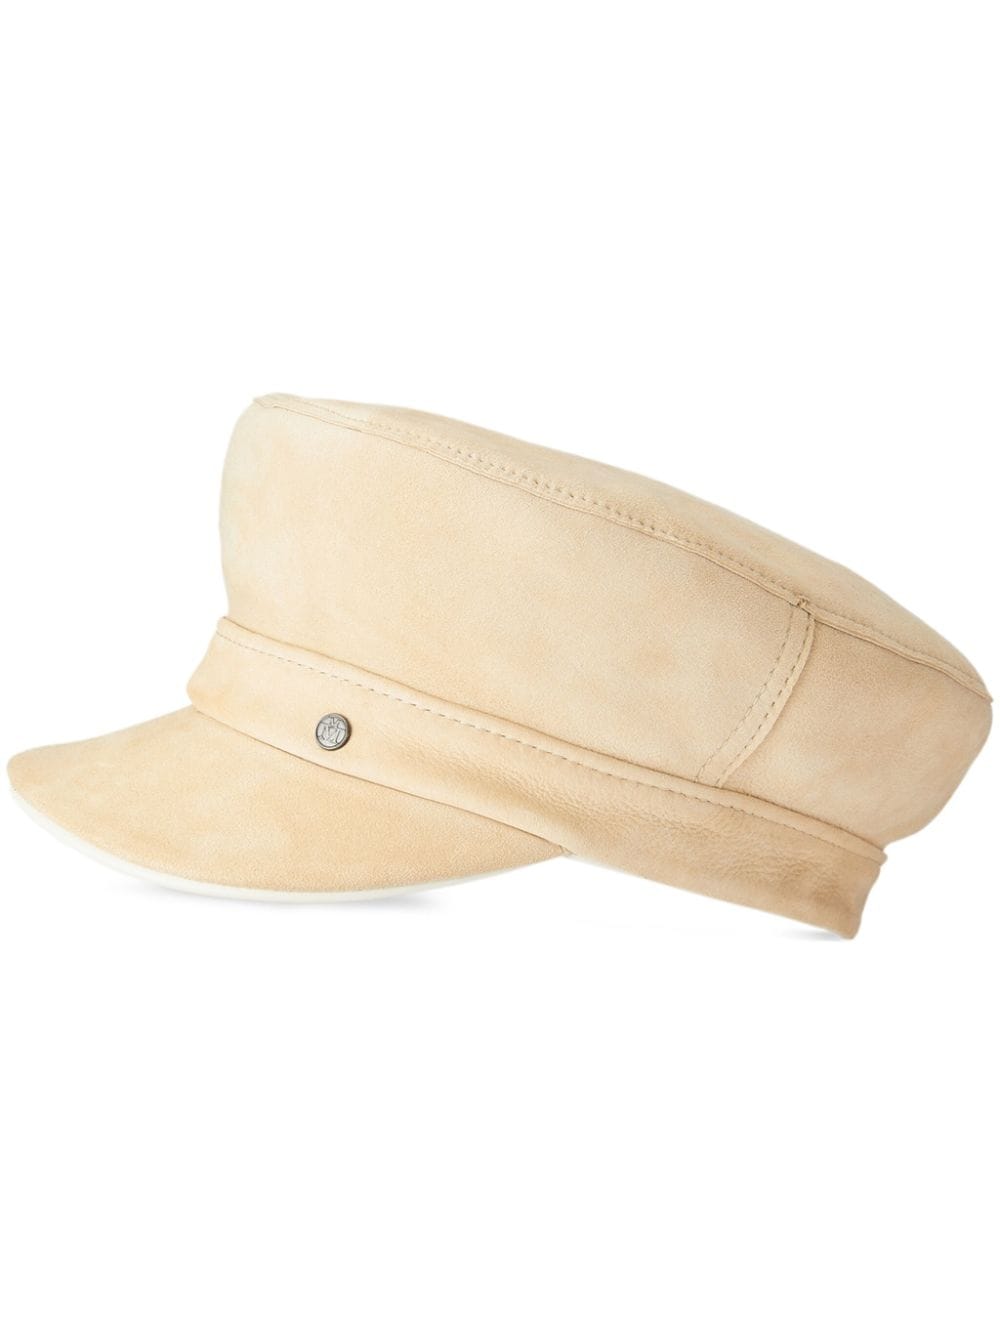 Maison Michel New Abby Reversible Leather Cap In Neutrals